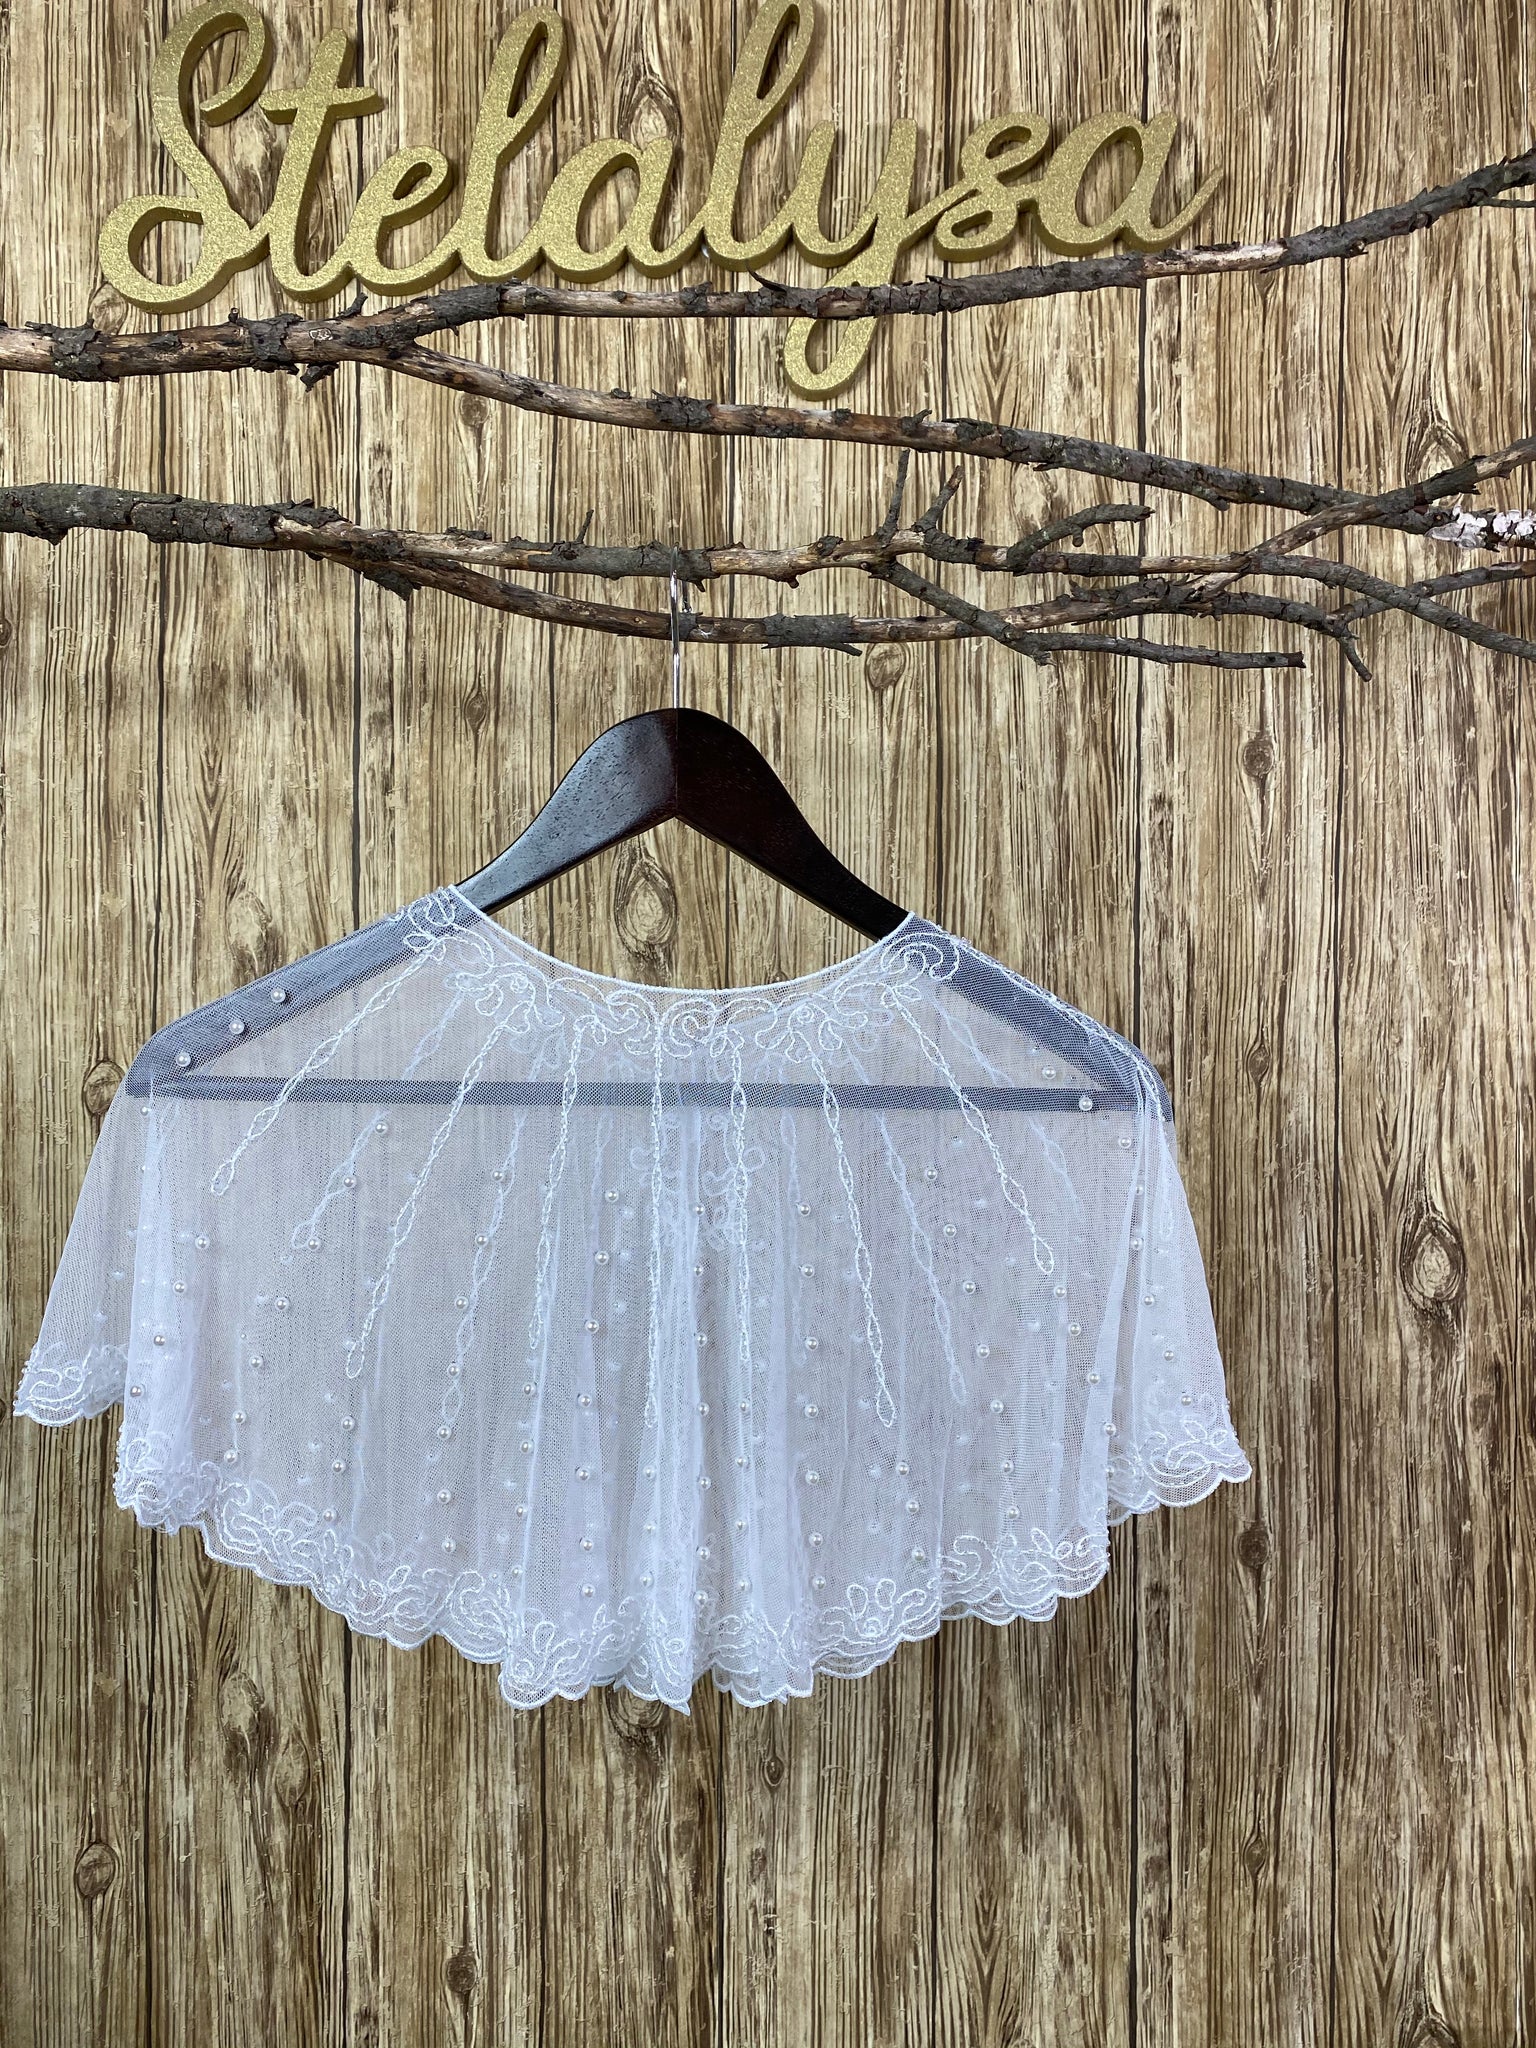 First Communion - Shawl with Pearls  Stunning white tulle shawl with embroidered swirl and pinstriping pearls.  This shawl can be worn with either a white or ivory communion dress/gown from our collection.  She will look like a princess wearing this elegant shawl on her special day!  